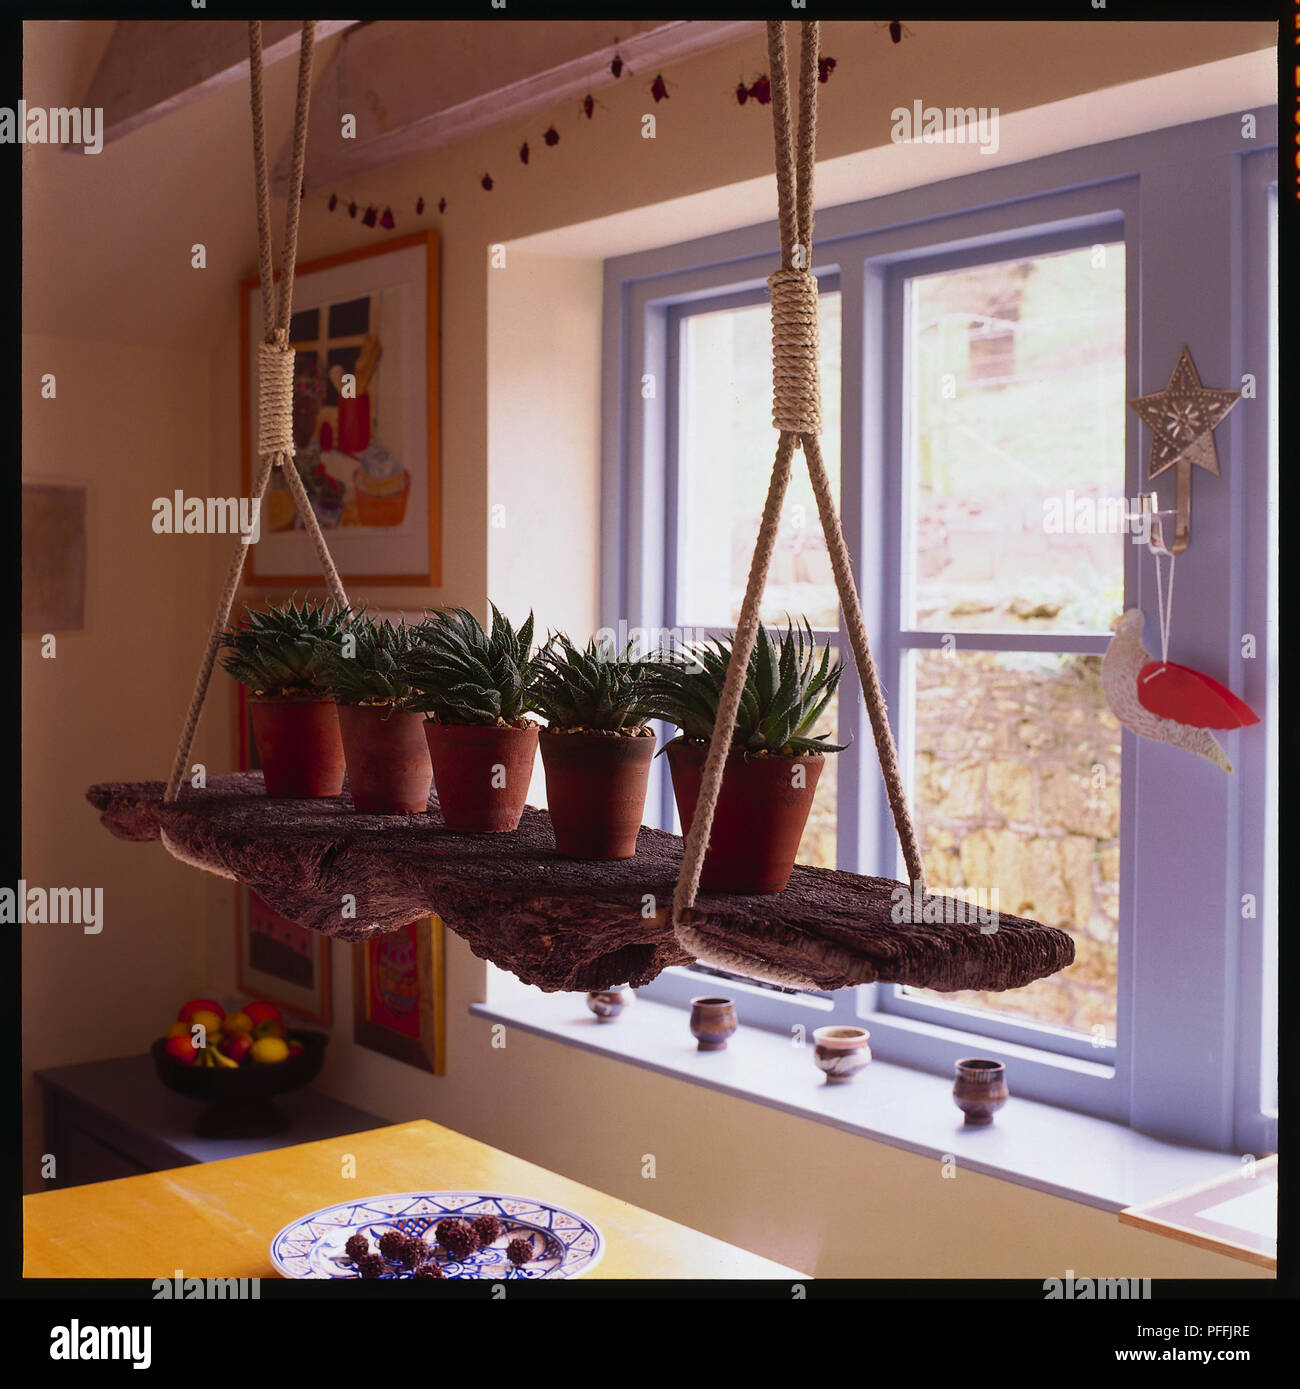 Cactus plants on a shelf hung by ropes from the ceiling, beside a window  Stock Photo - Alamy